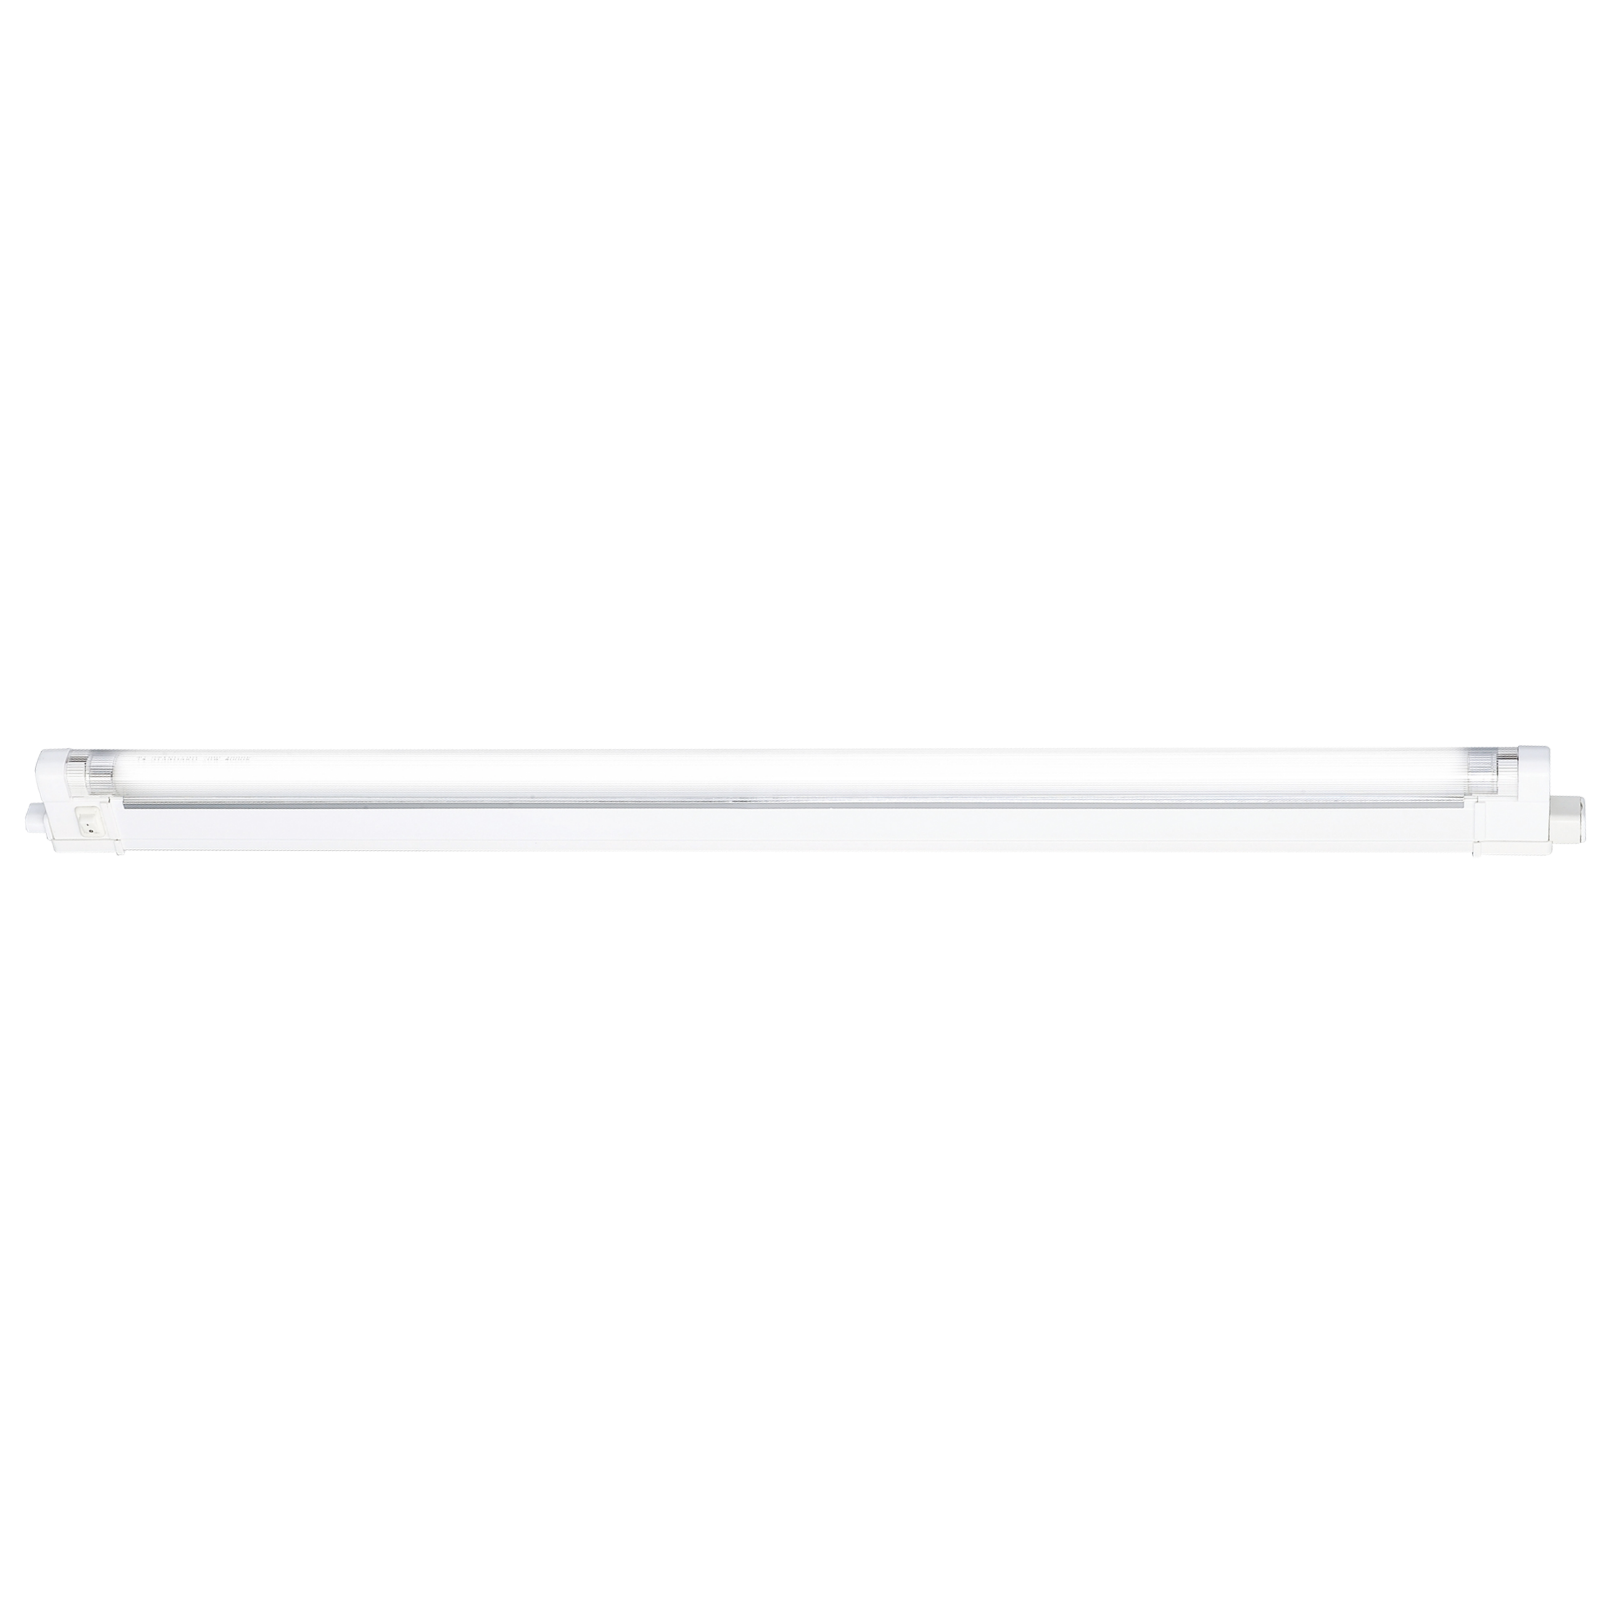 IP20 20W T4 Fluorescent Fitting With Tube, Switch And Diffuser 4000K - T420 